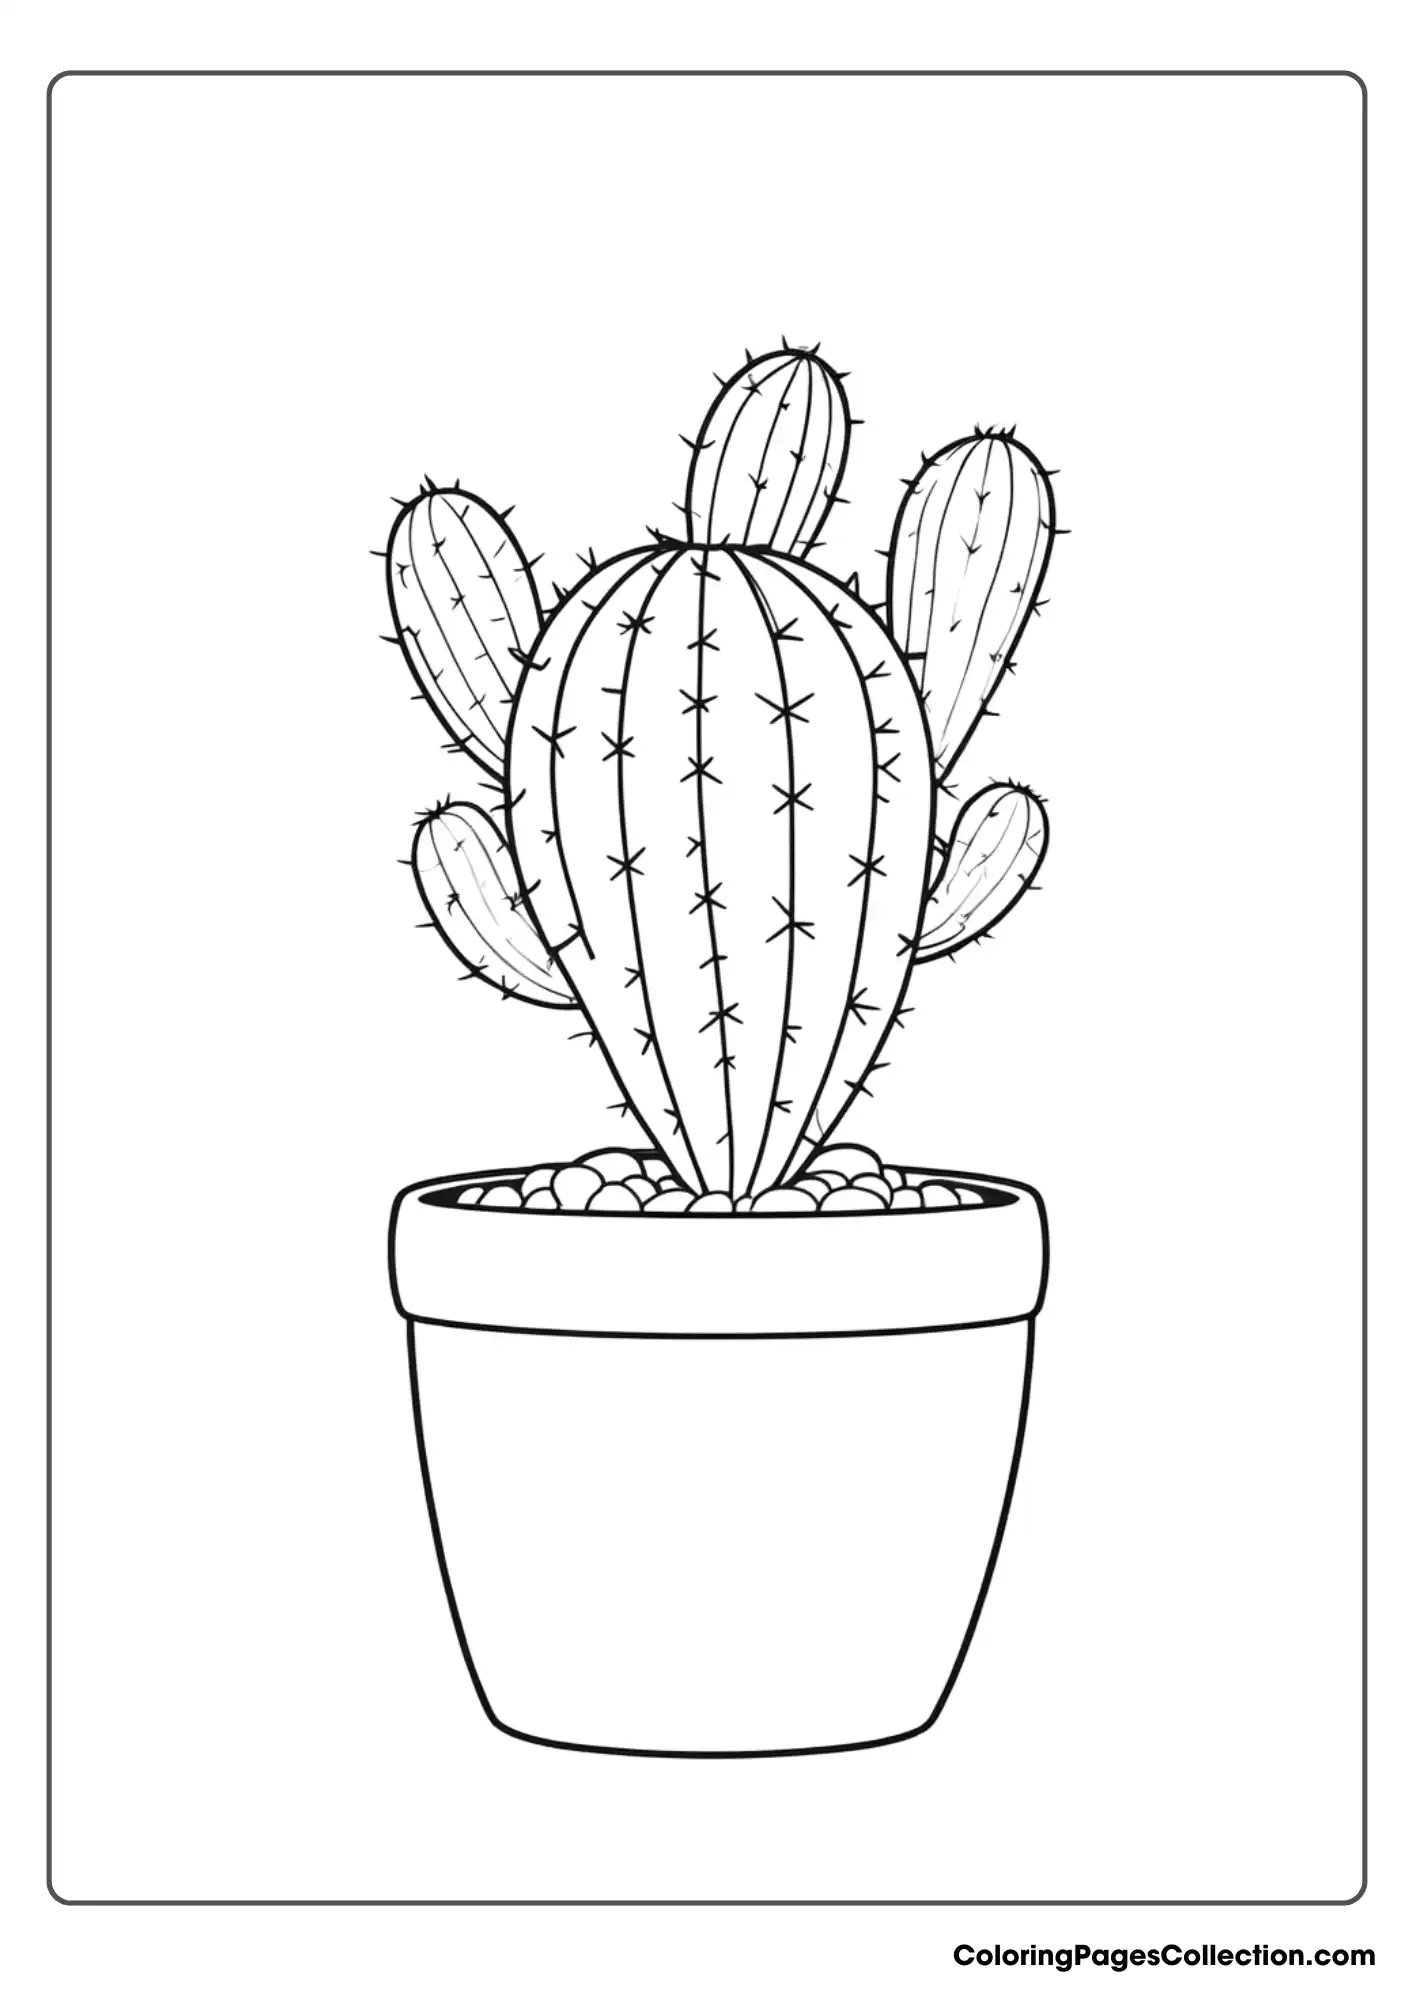 Coloring pages for teens, Cactus 